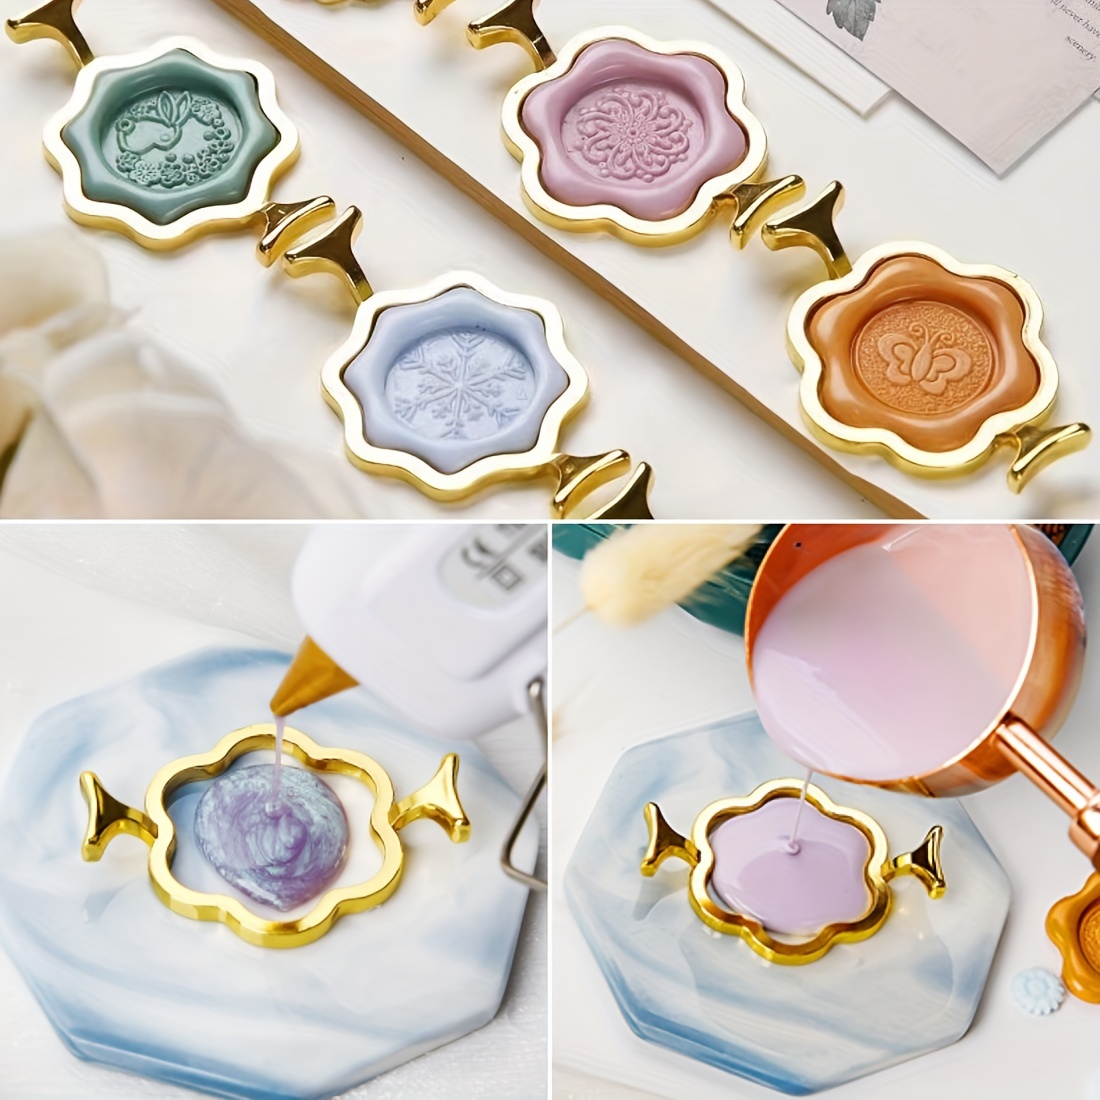 1Pc Wax Seal Molds Include Round Or Flower Shaped Metal Wax Seal Mold Wax  Sealing Tools for Invitations Envelopes Cards